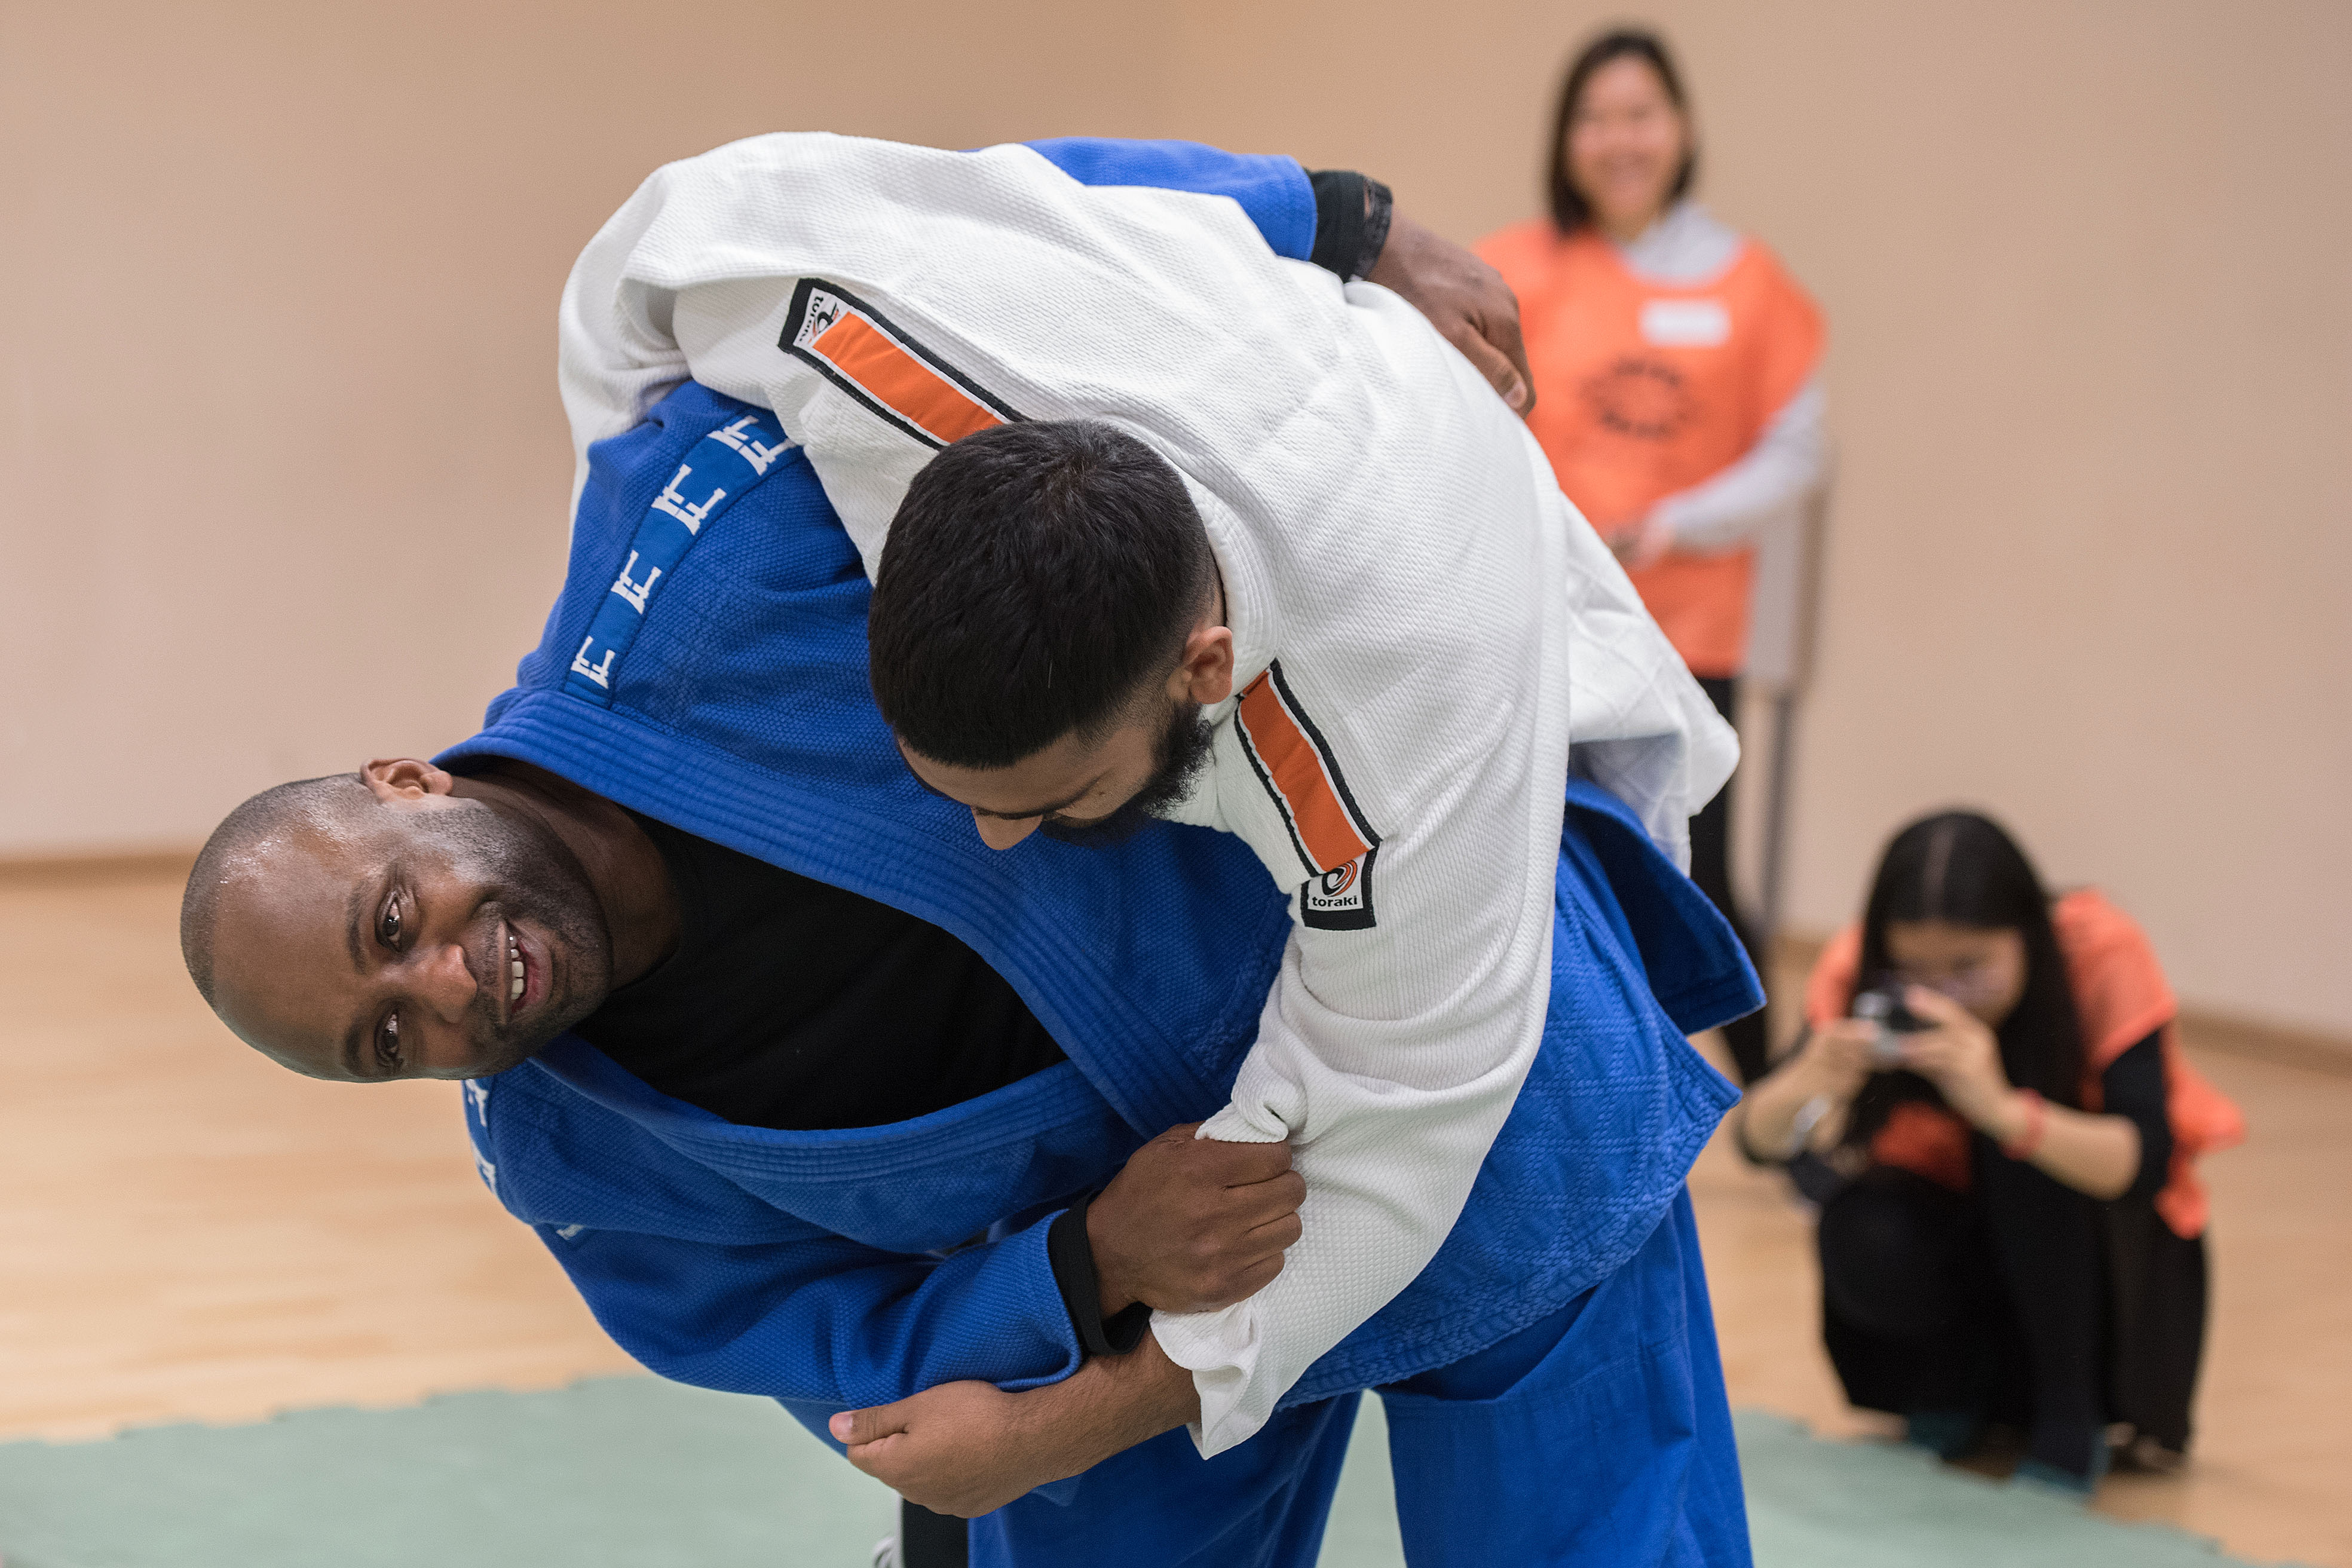 Two men in judo session, working to throw each other to the ground